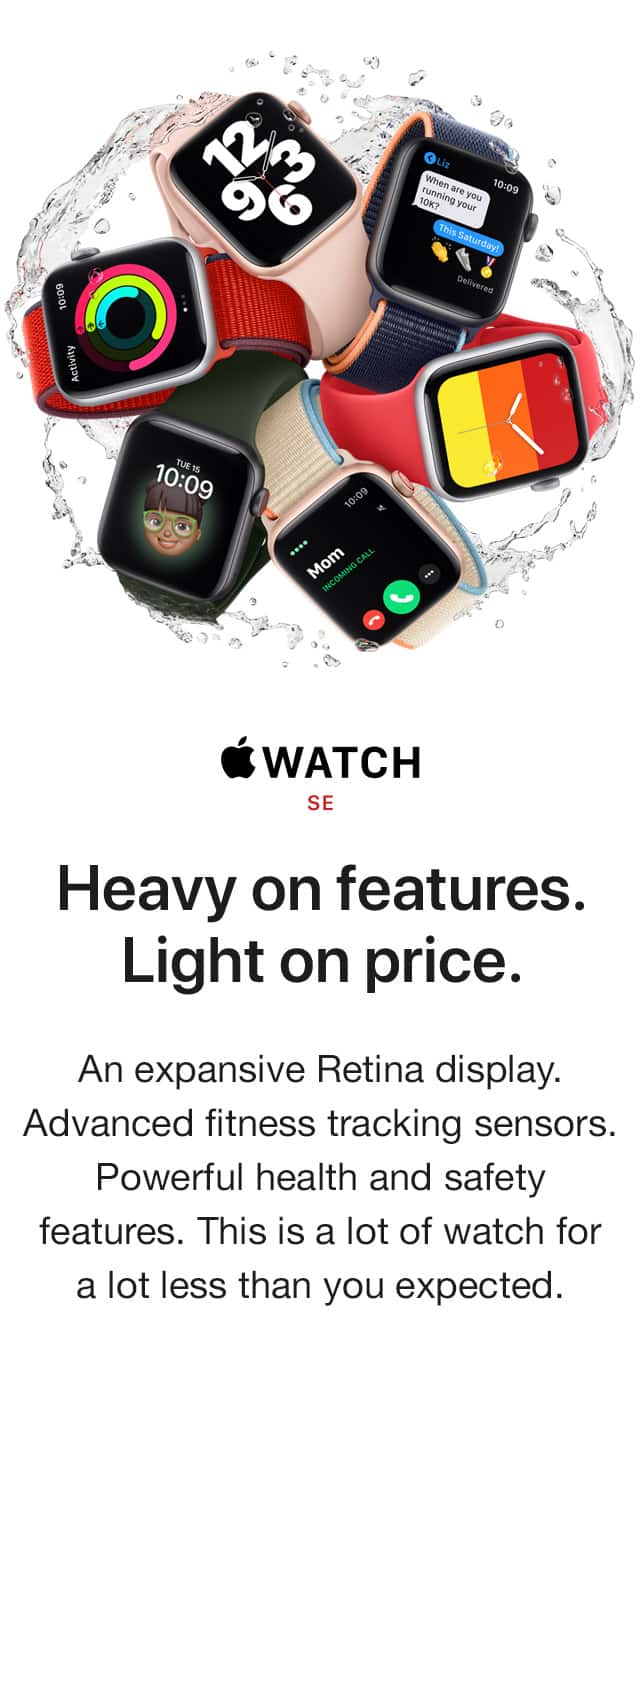 WATCH SE. Heavy on features. Light on price. An expansive Retina display. Advanced fitness tracking sensors. Powerful health and safety features. This is a lot of watch for a lot less than you expected.